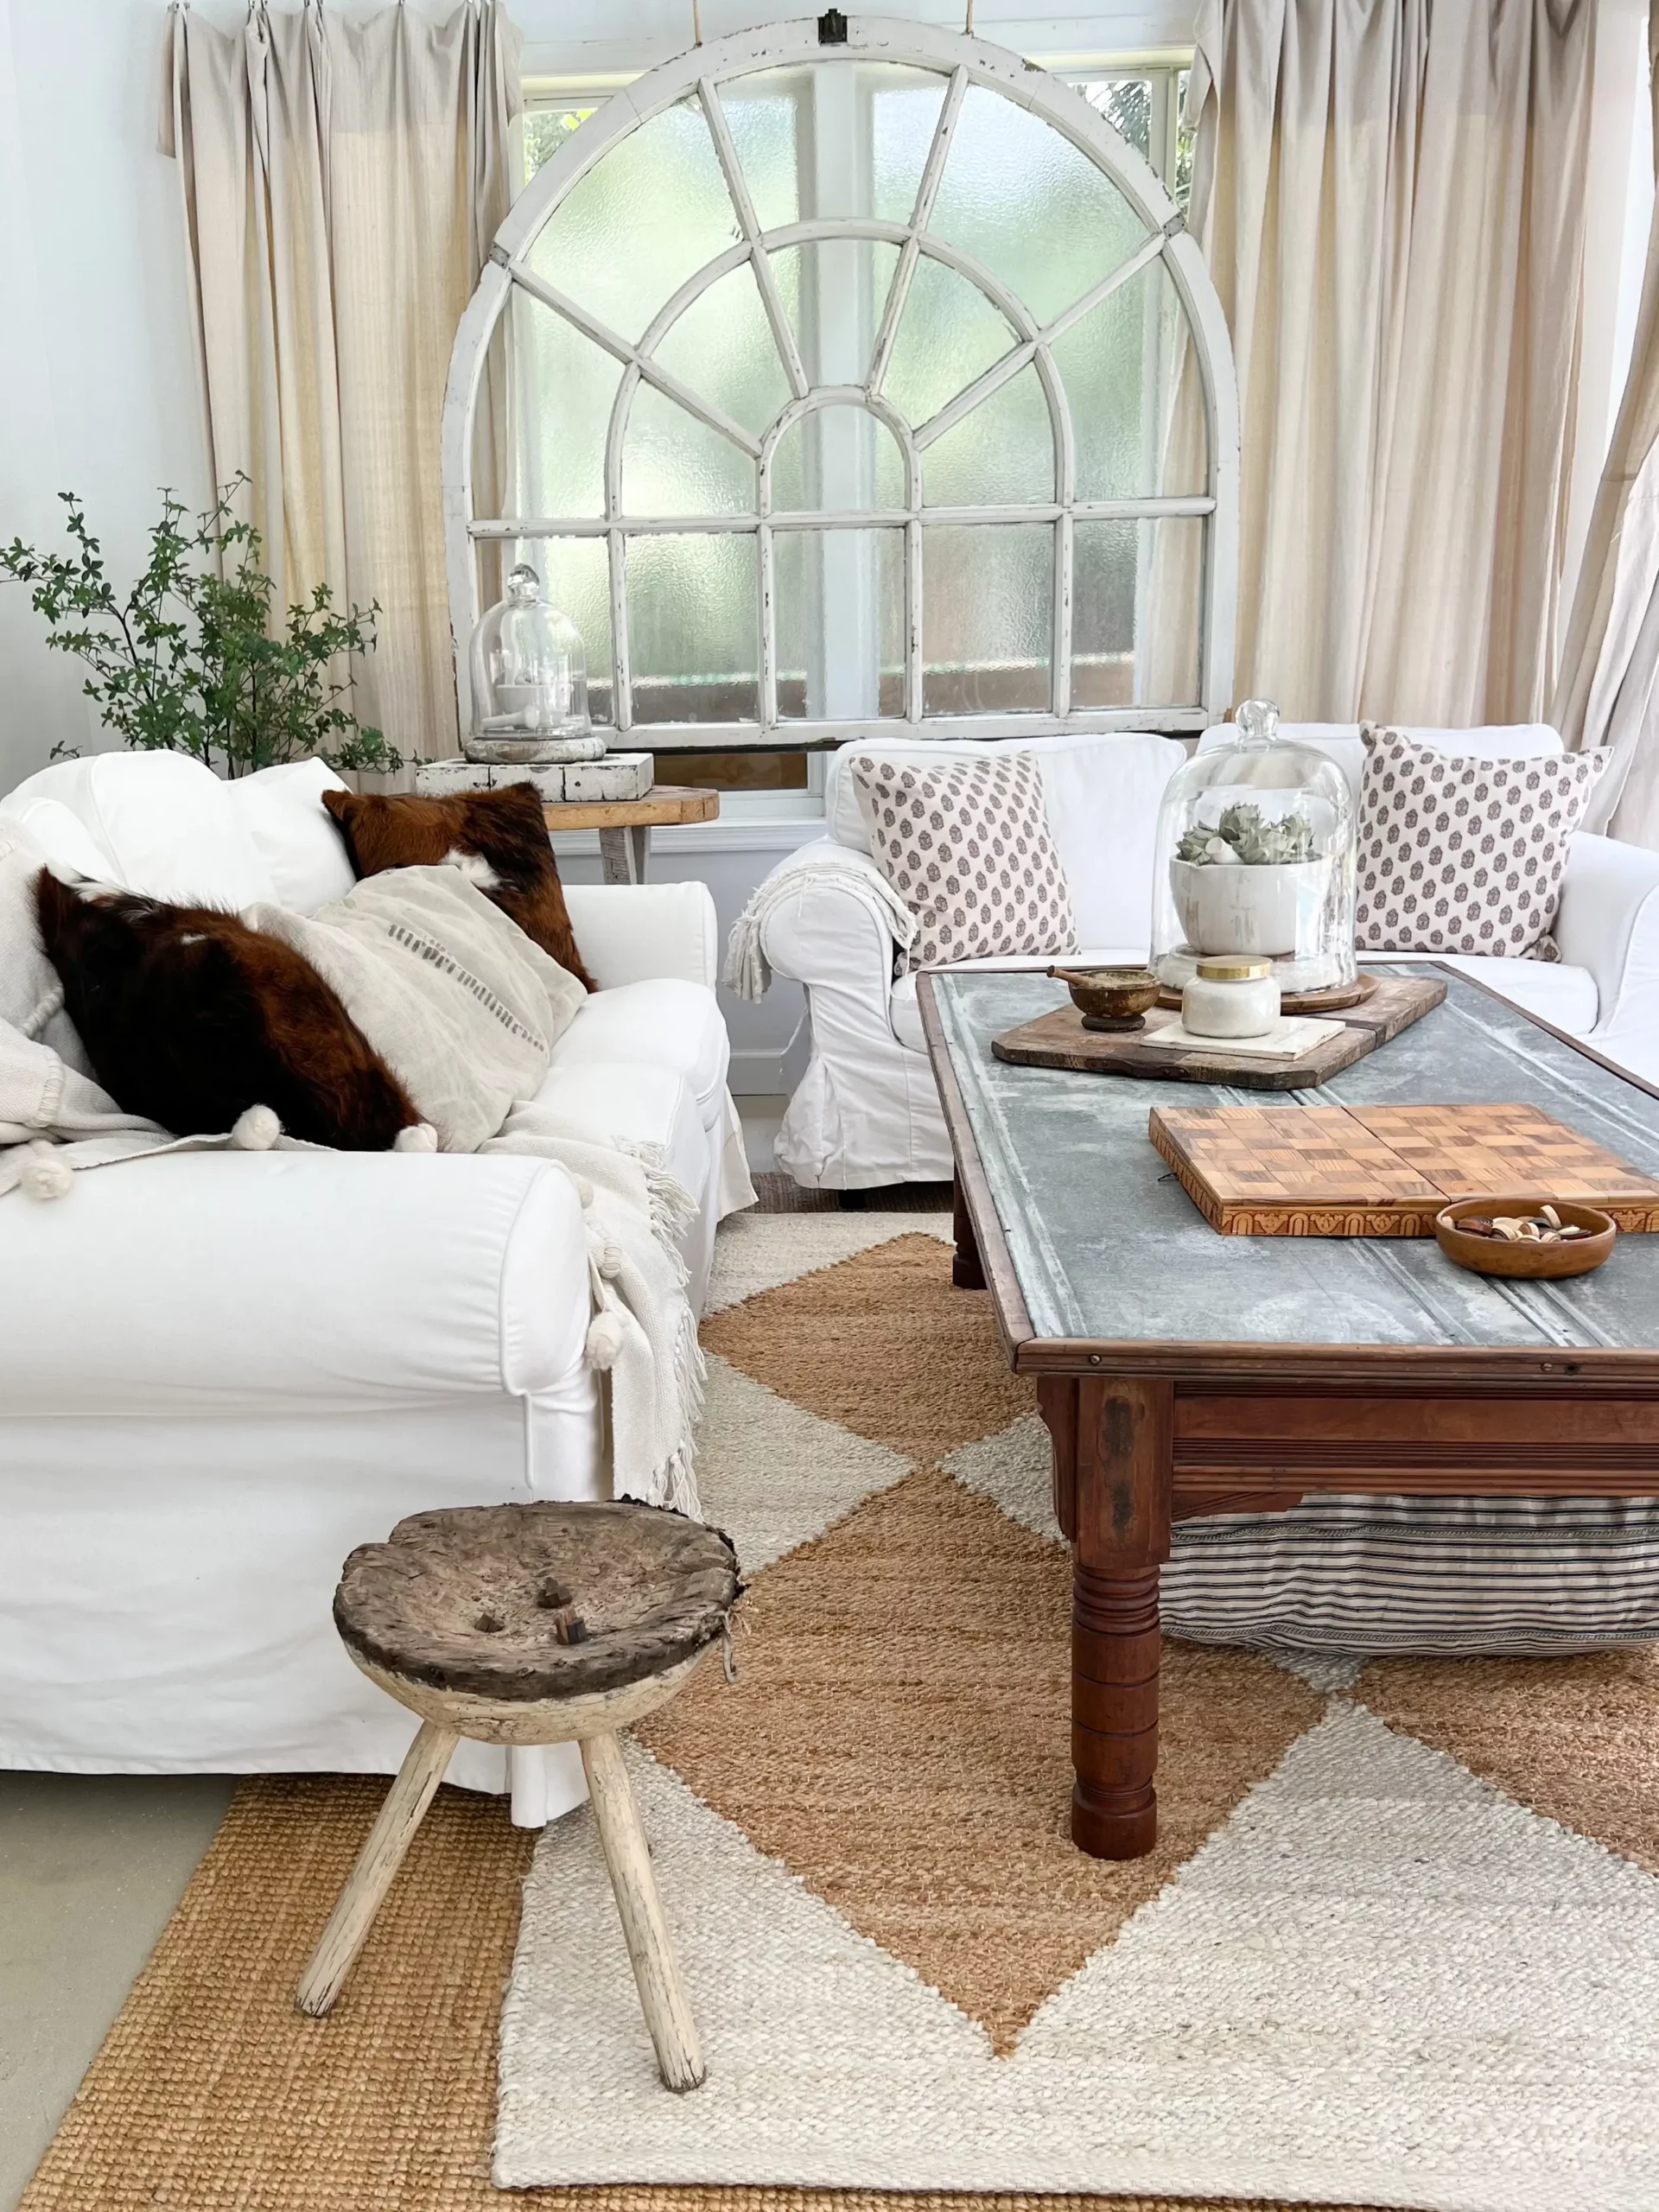 back living room area with a round side table holding a plant in between the two sofas